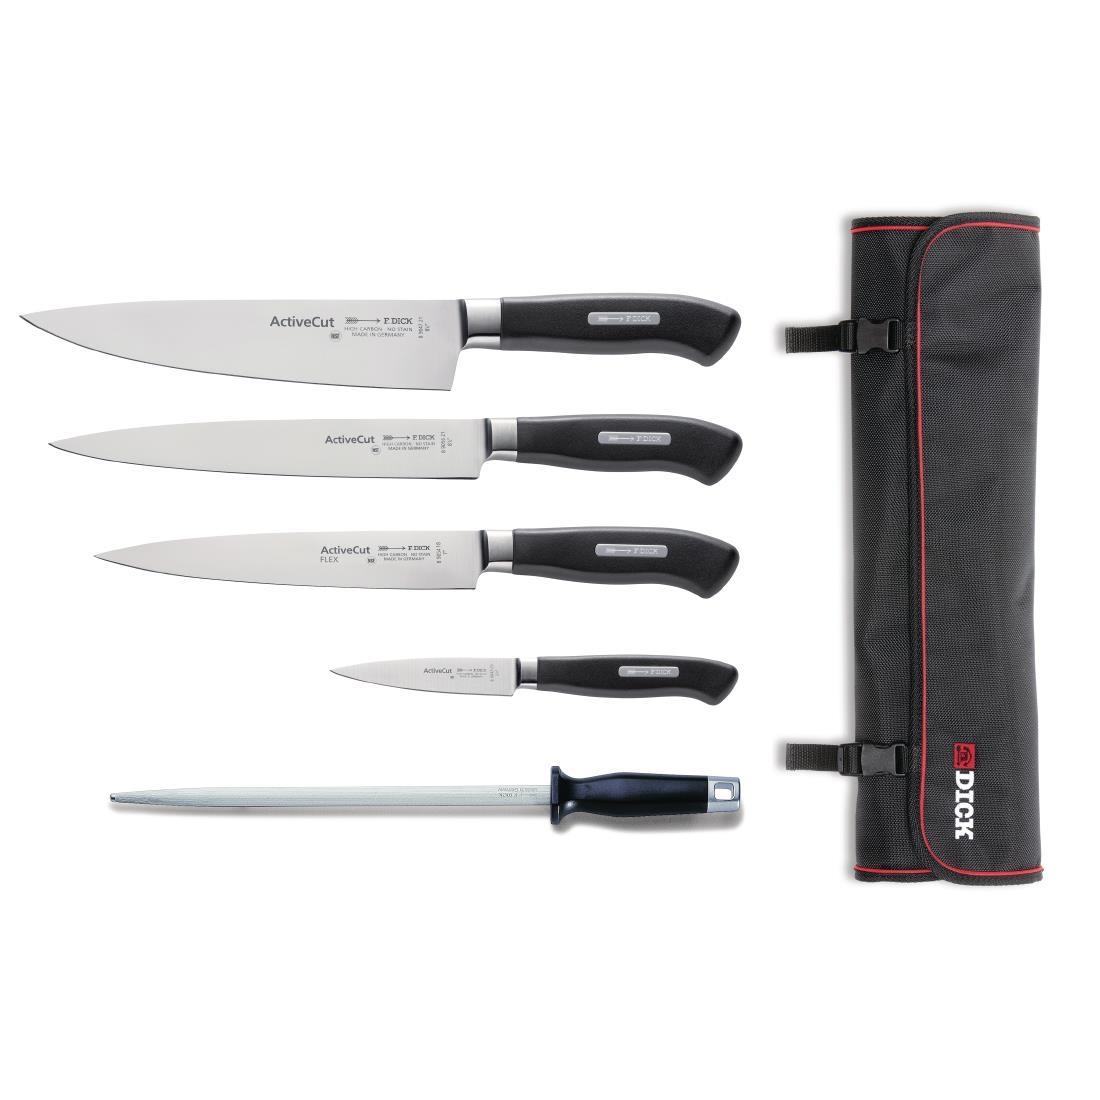 Dick Active Cut 5 Piece Knife Set with Wallet - S903  - 1